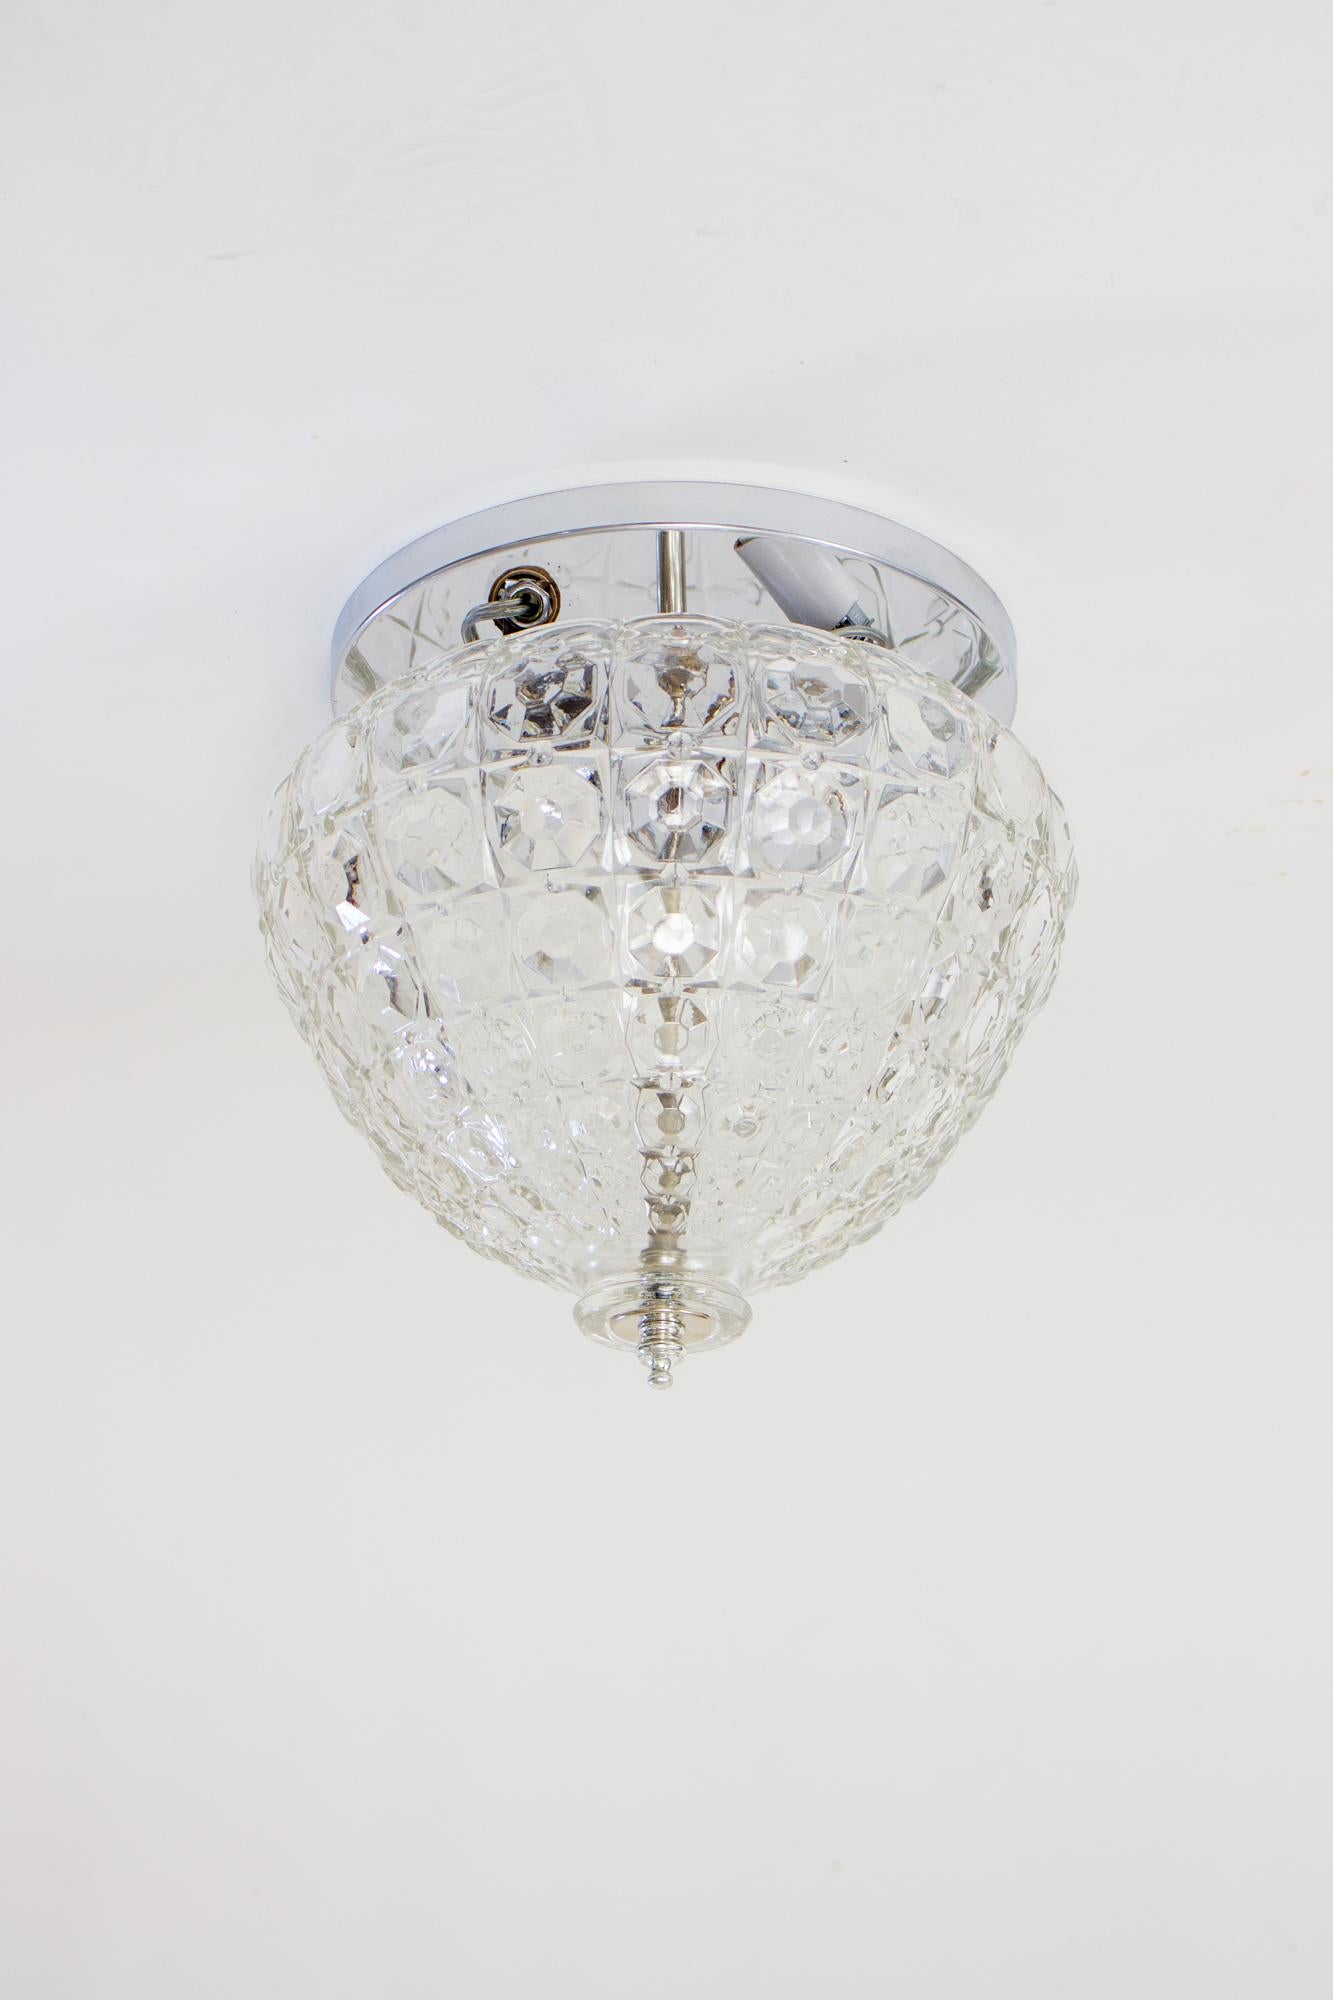 Mid-20th century crystalline glass flush mount fixture with chrome ceiling plate and three lights. A single clear glass dome, shaped to resemble a crystal basket. Silver colored hardware disappears to highlight the crystal. The sockets are